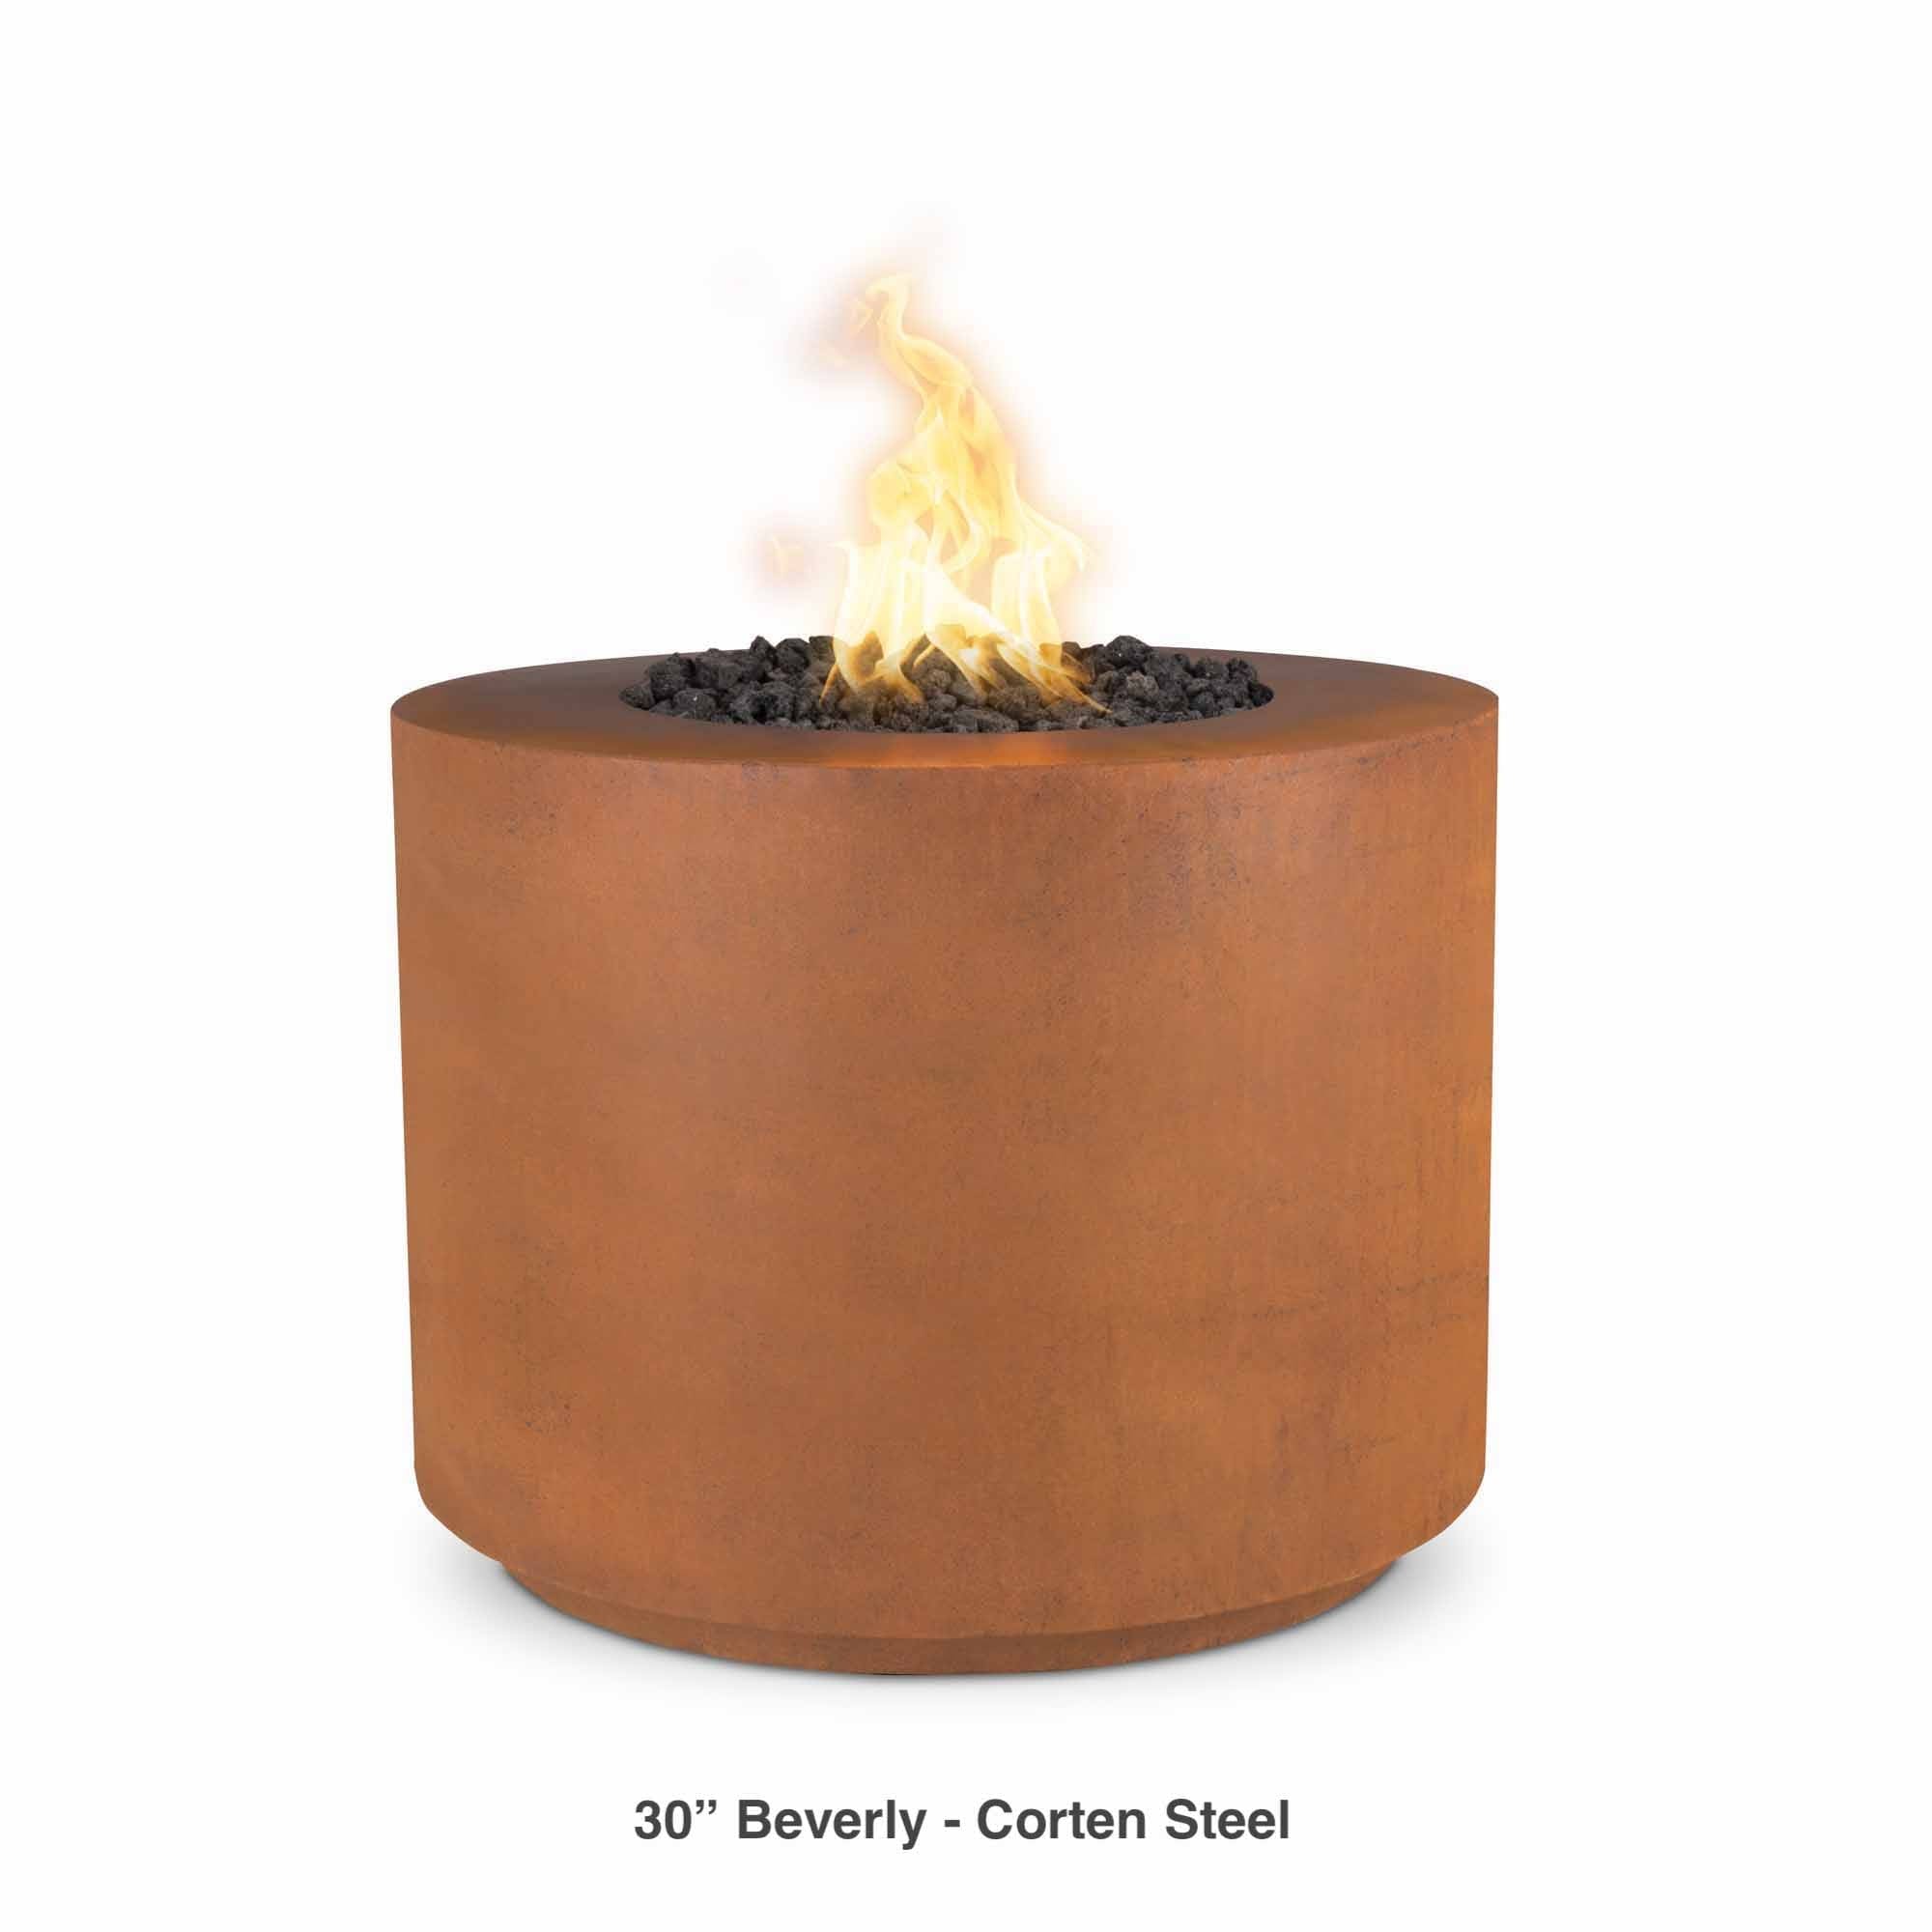 The Outdoor Plus Fire Features The Outdoor Plus 30", 36", 42" Round Beverly Fire Pit - Metal Collection / OPT-xxRRCPR, OPT-xxRRCS, OPT-xxRRSS, OPT-xxPCB